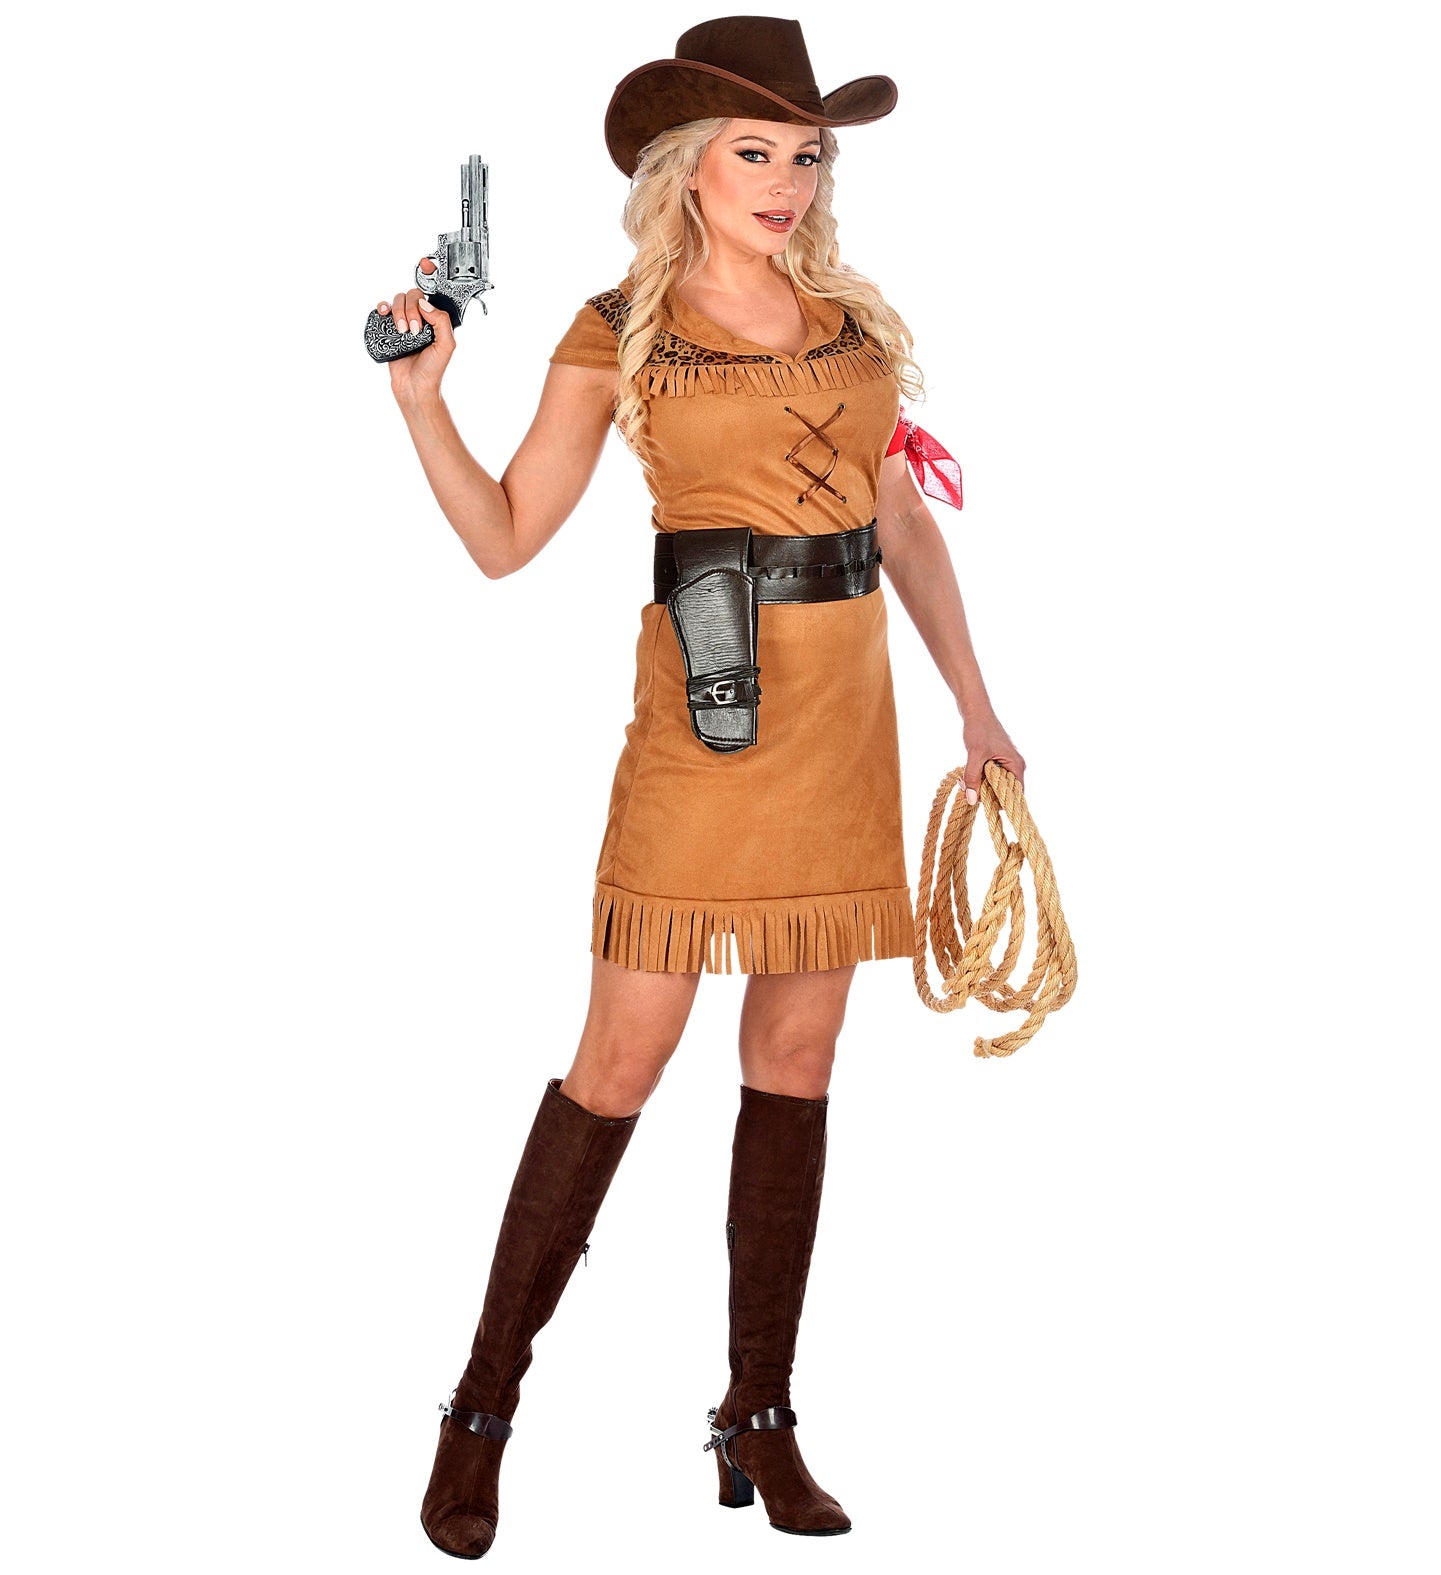 Sassy Rodeo Cowgirl Costume